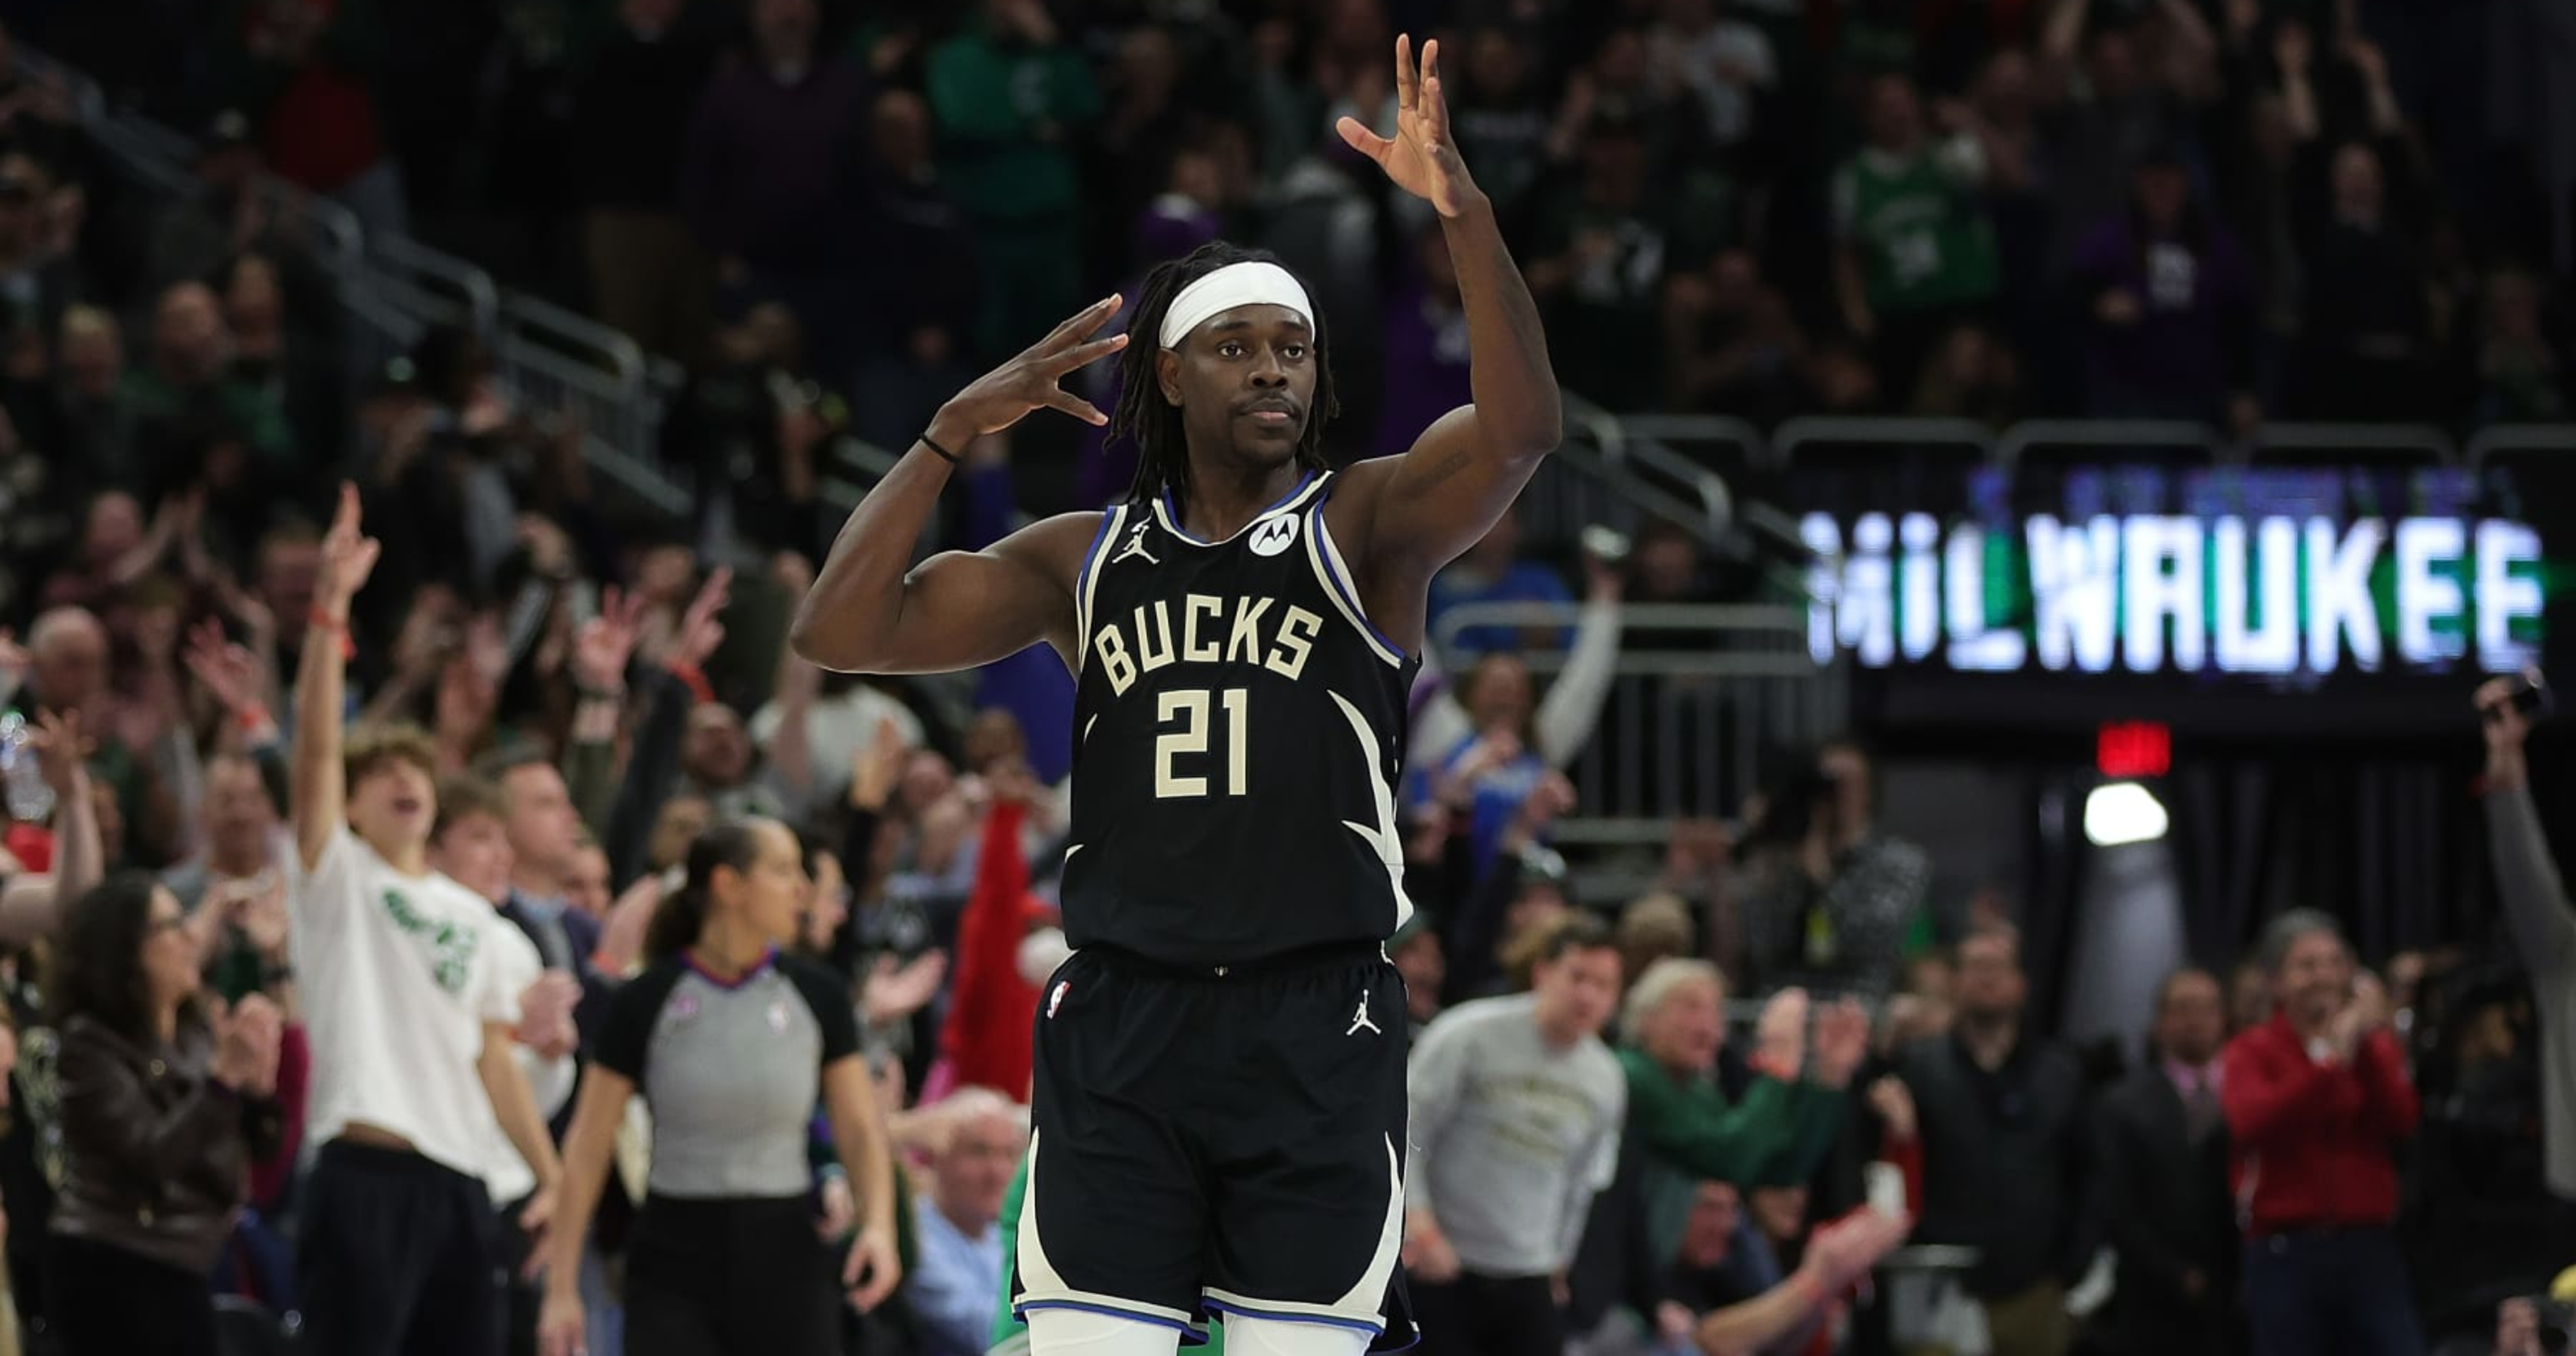 How Jrue Holiday is viewing transition to Celtics after two weeks in Boston